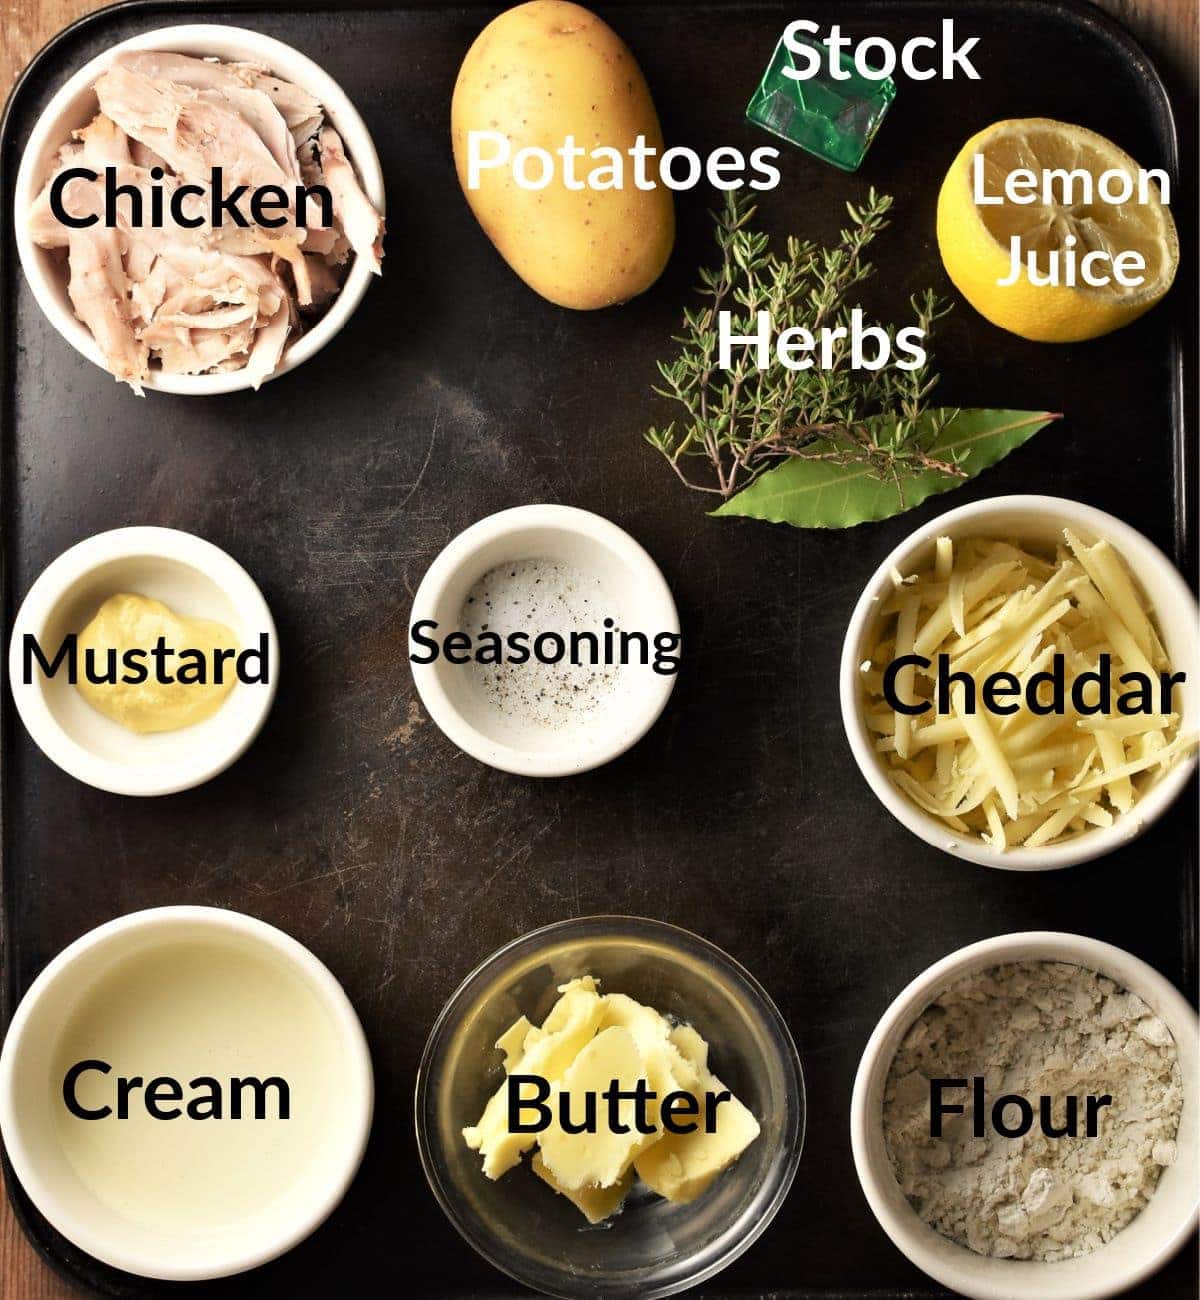 Chicken and potato bake ingredients in individual dishes.